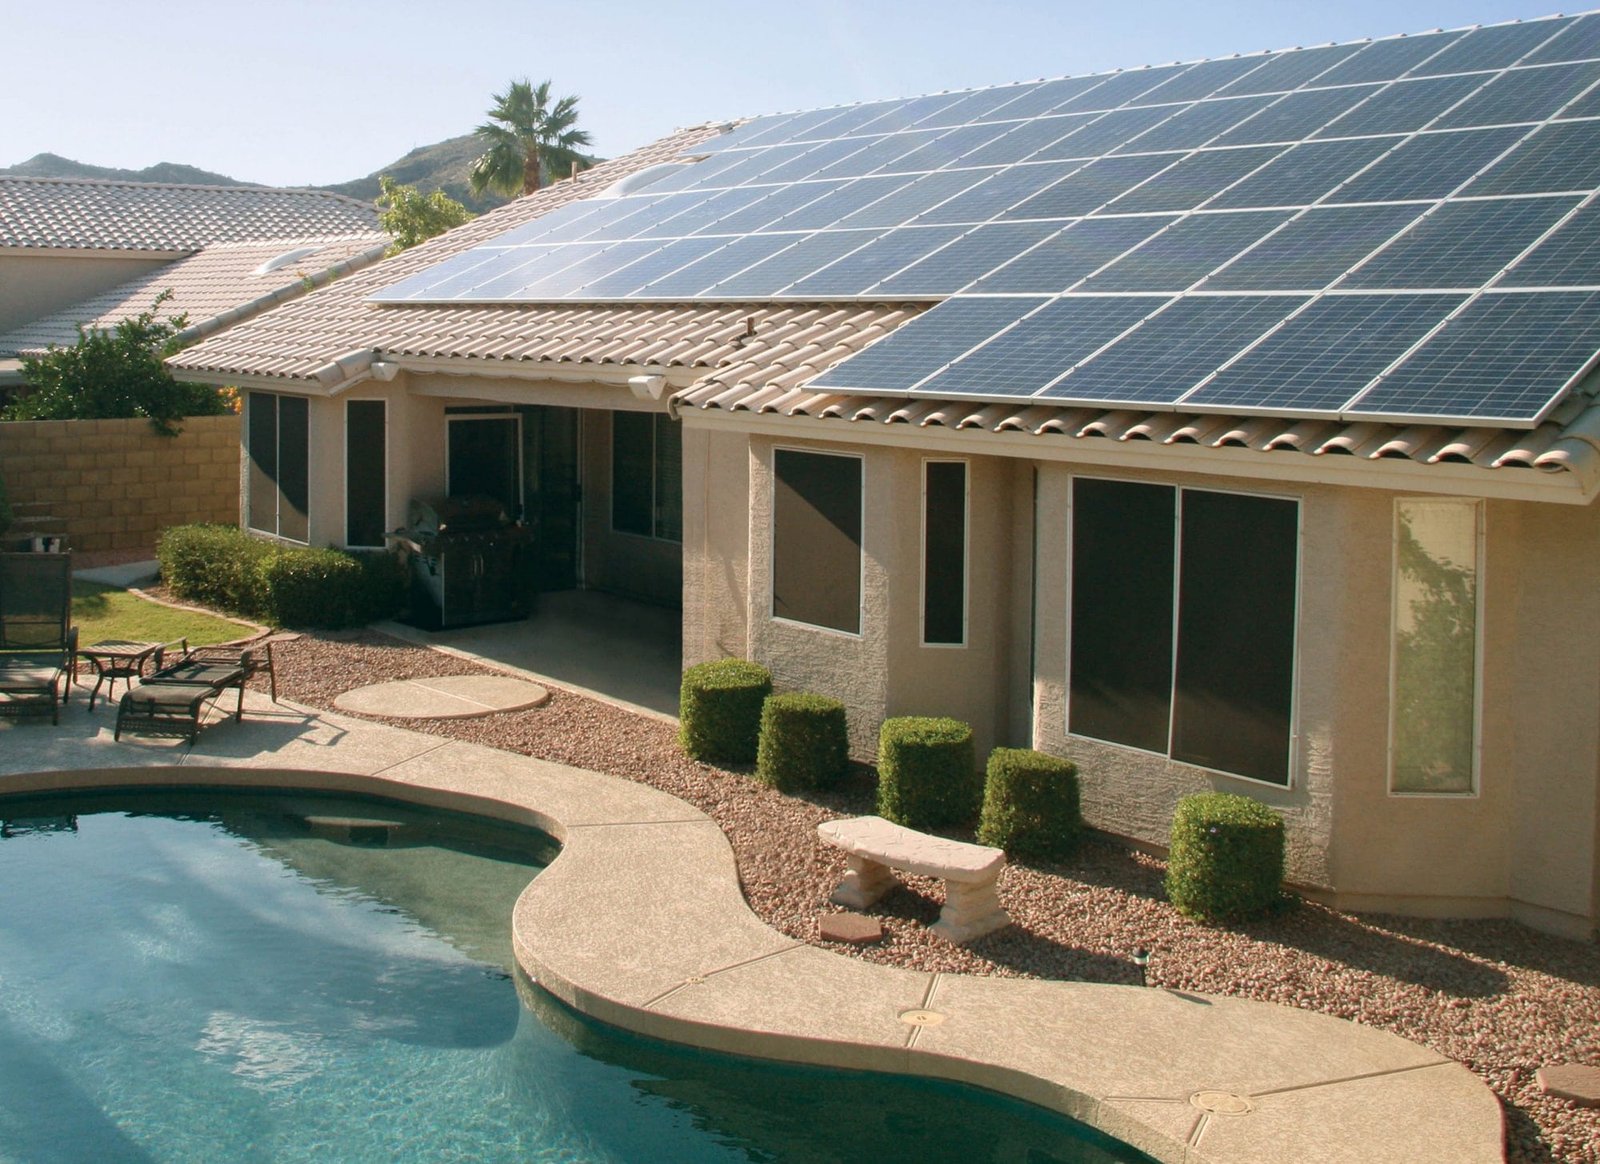 Solar System for Home Harnessing the Power of the Sun